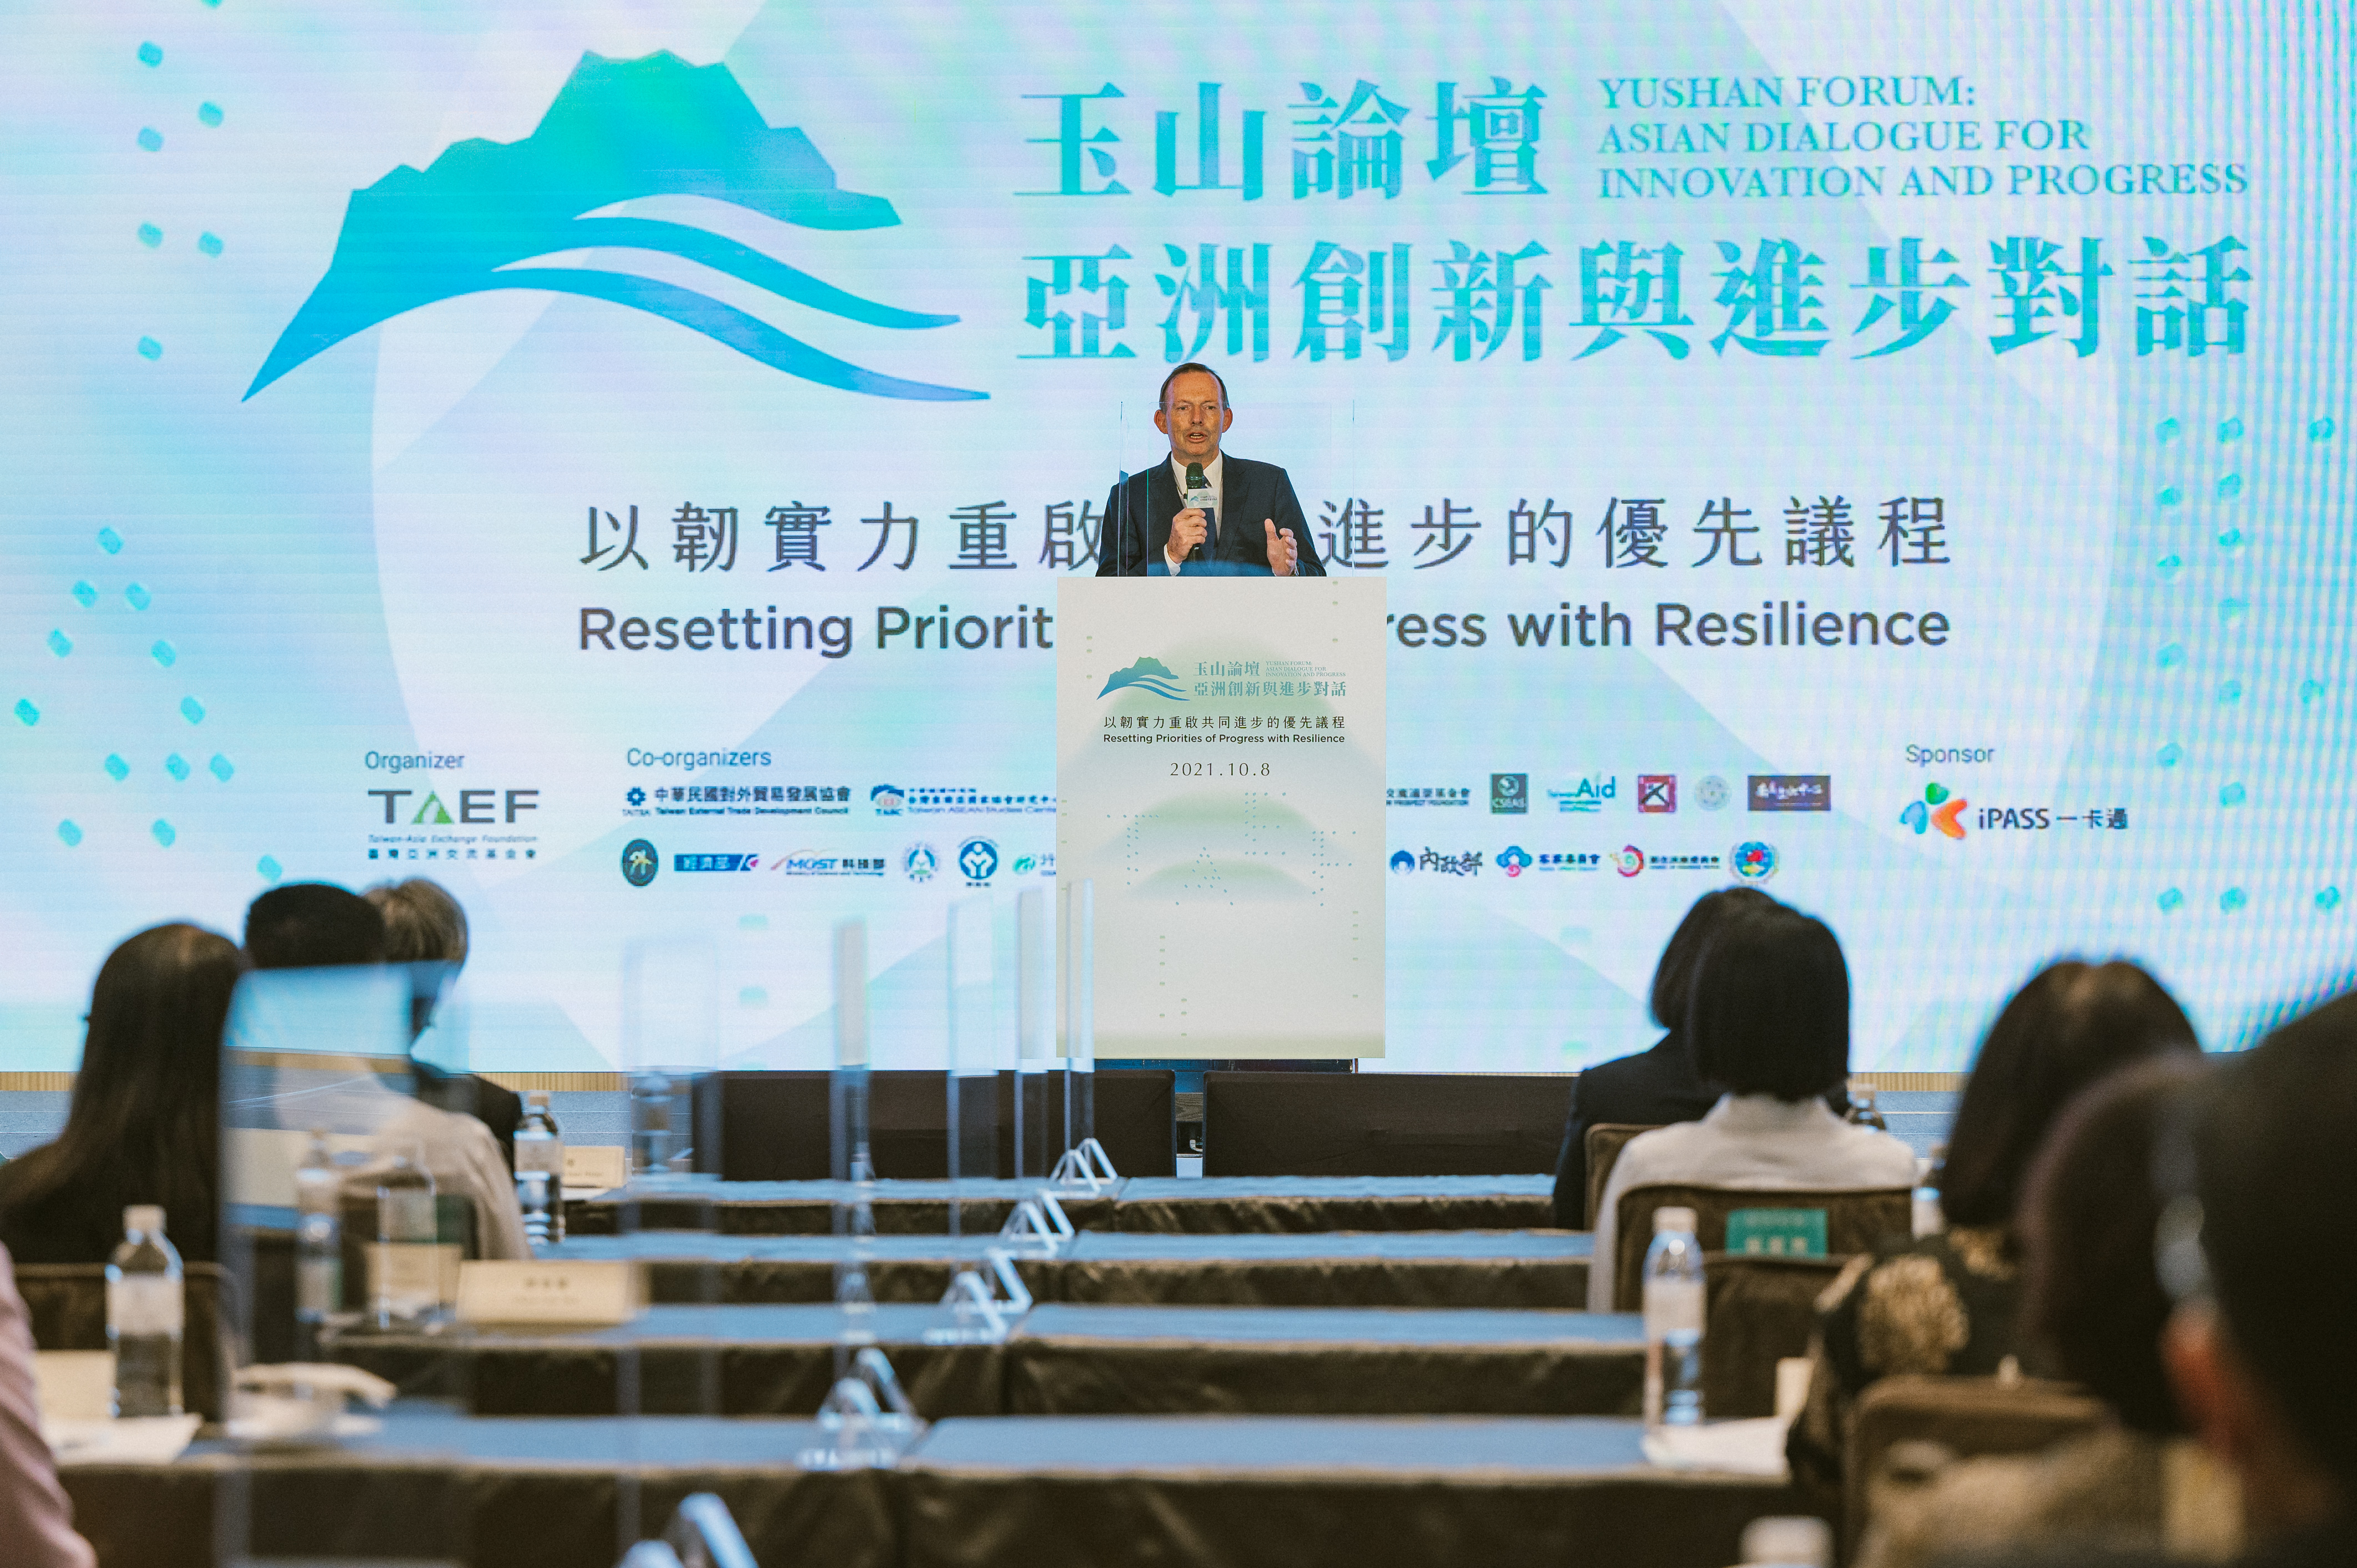 Leaders from U.S., Japan, Australia and 10 other nations gathered at 2021 Yushan Forum to jointly plan for the post pandemic era